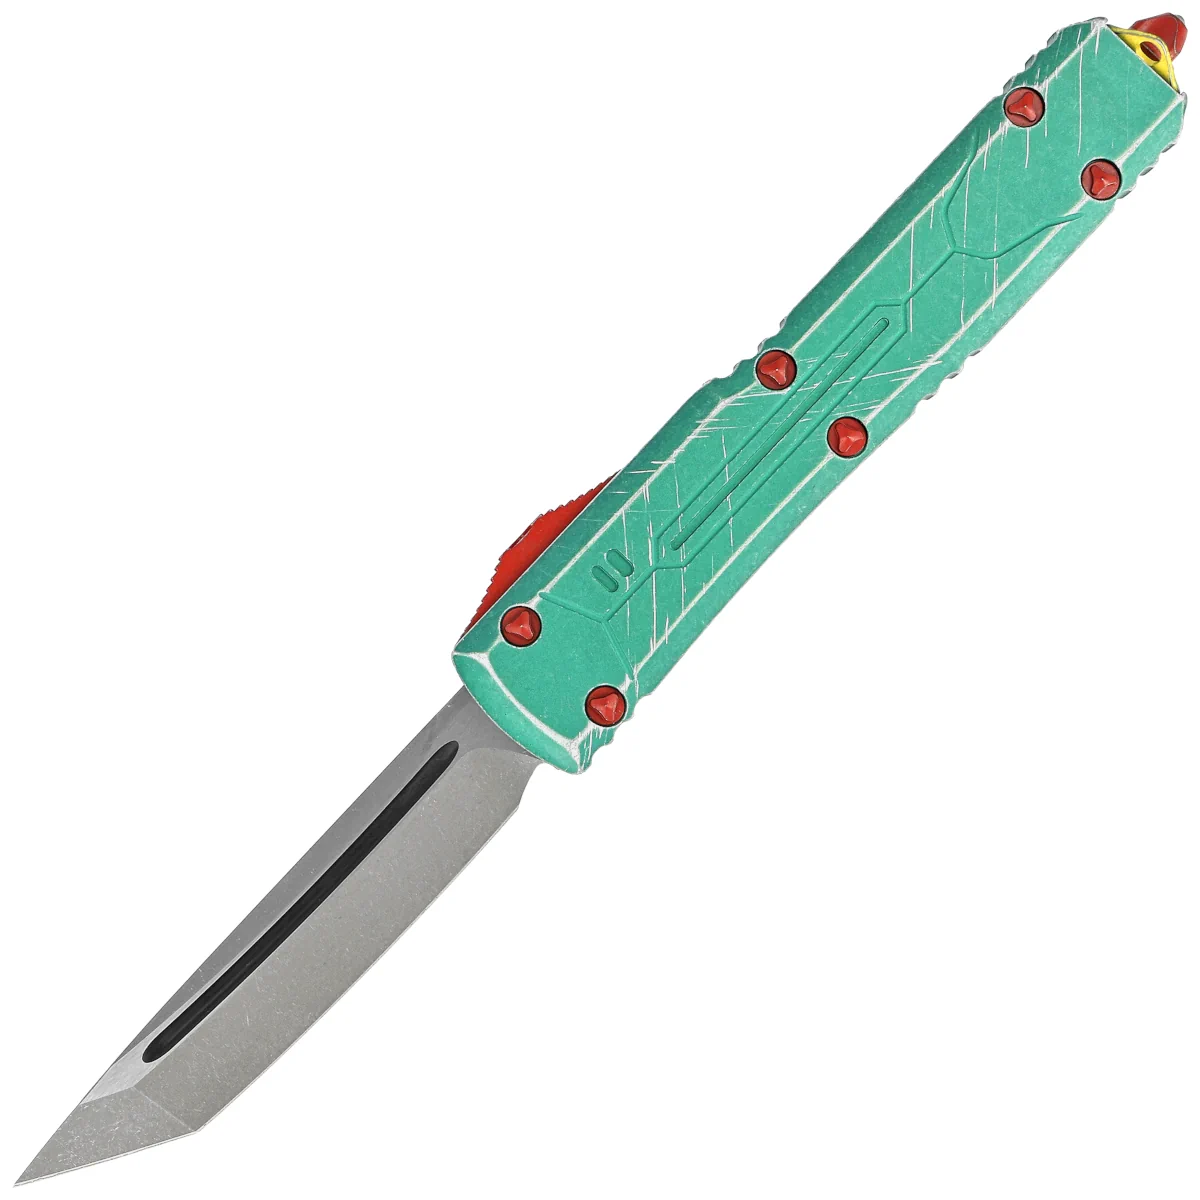 Microtech Ultratech T/E Bounty Hunter Signature Distressed Green Aluminium, Apocalyptic M390 by Tony Marfione (123-10BH)